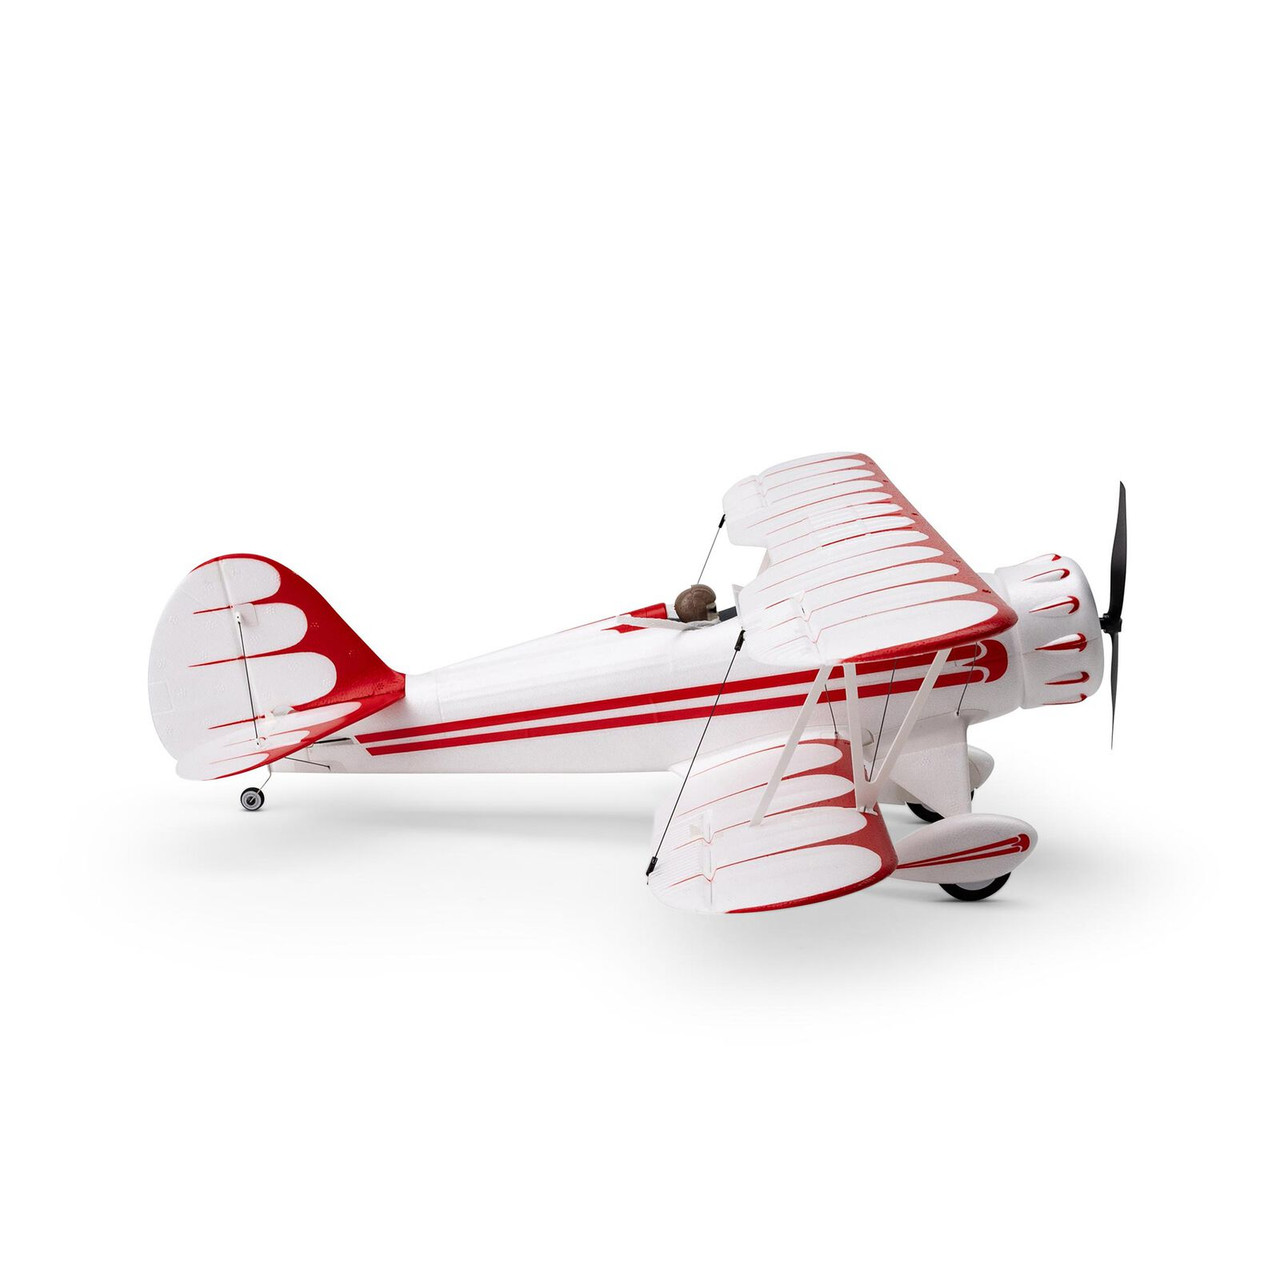 Eflite UMX WACO BNF Basic with AS3X and SAFE Select, White